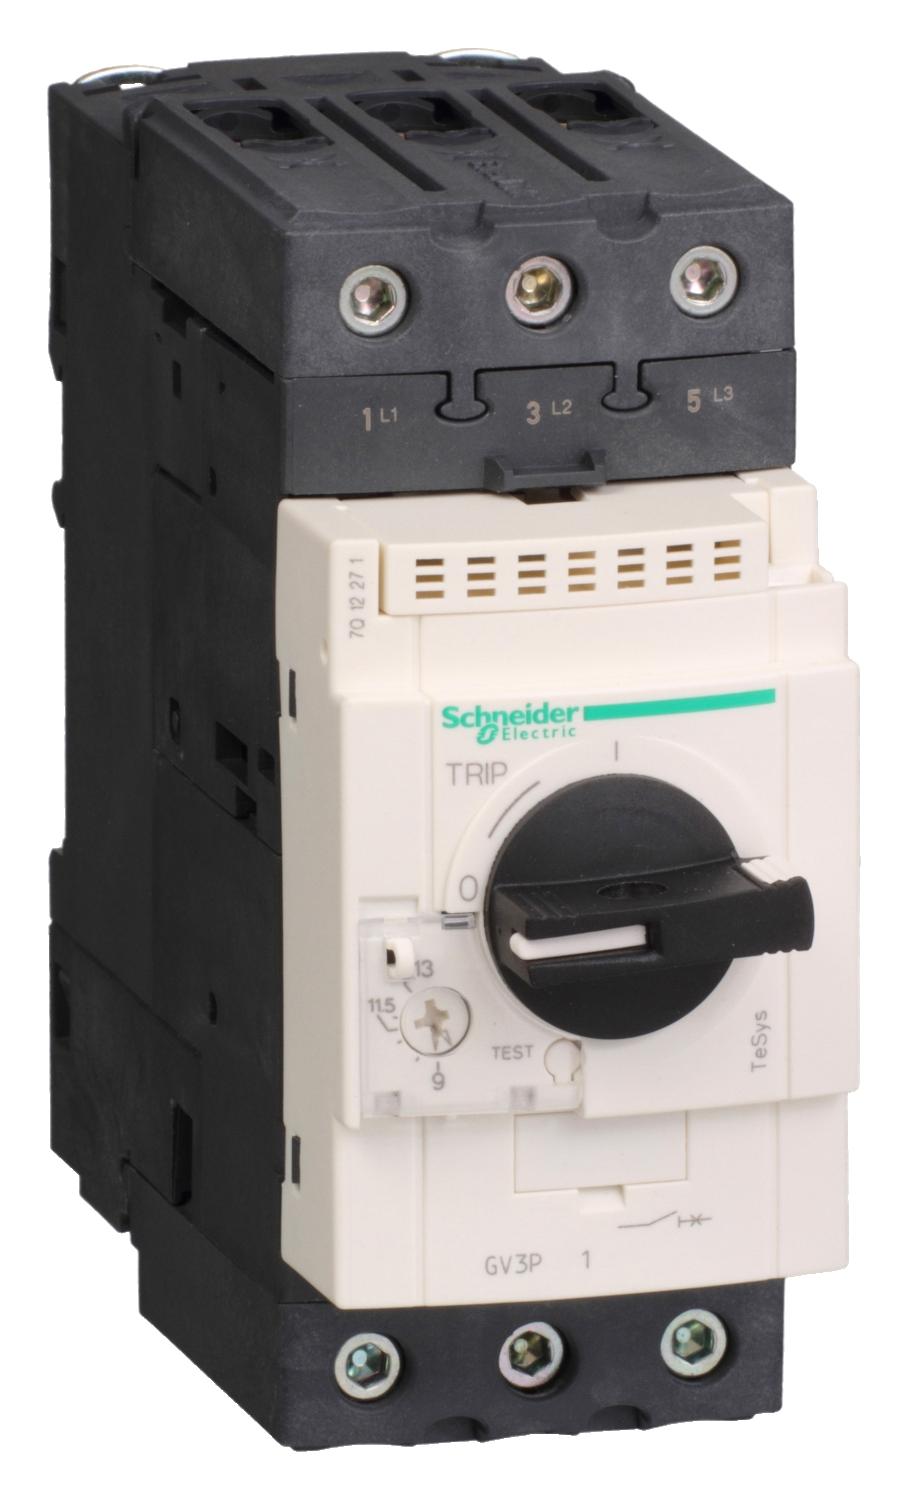 GV3P25 THERMAL MAGNETIC CIRCUIT BREAKER SCHNEIDER ELECTRIC